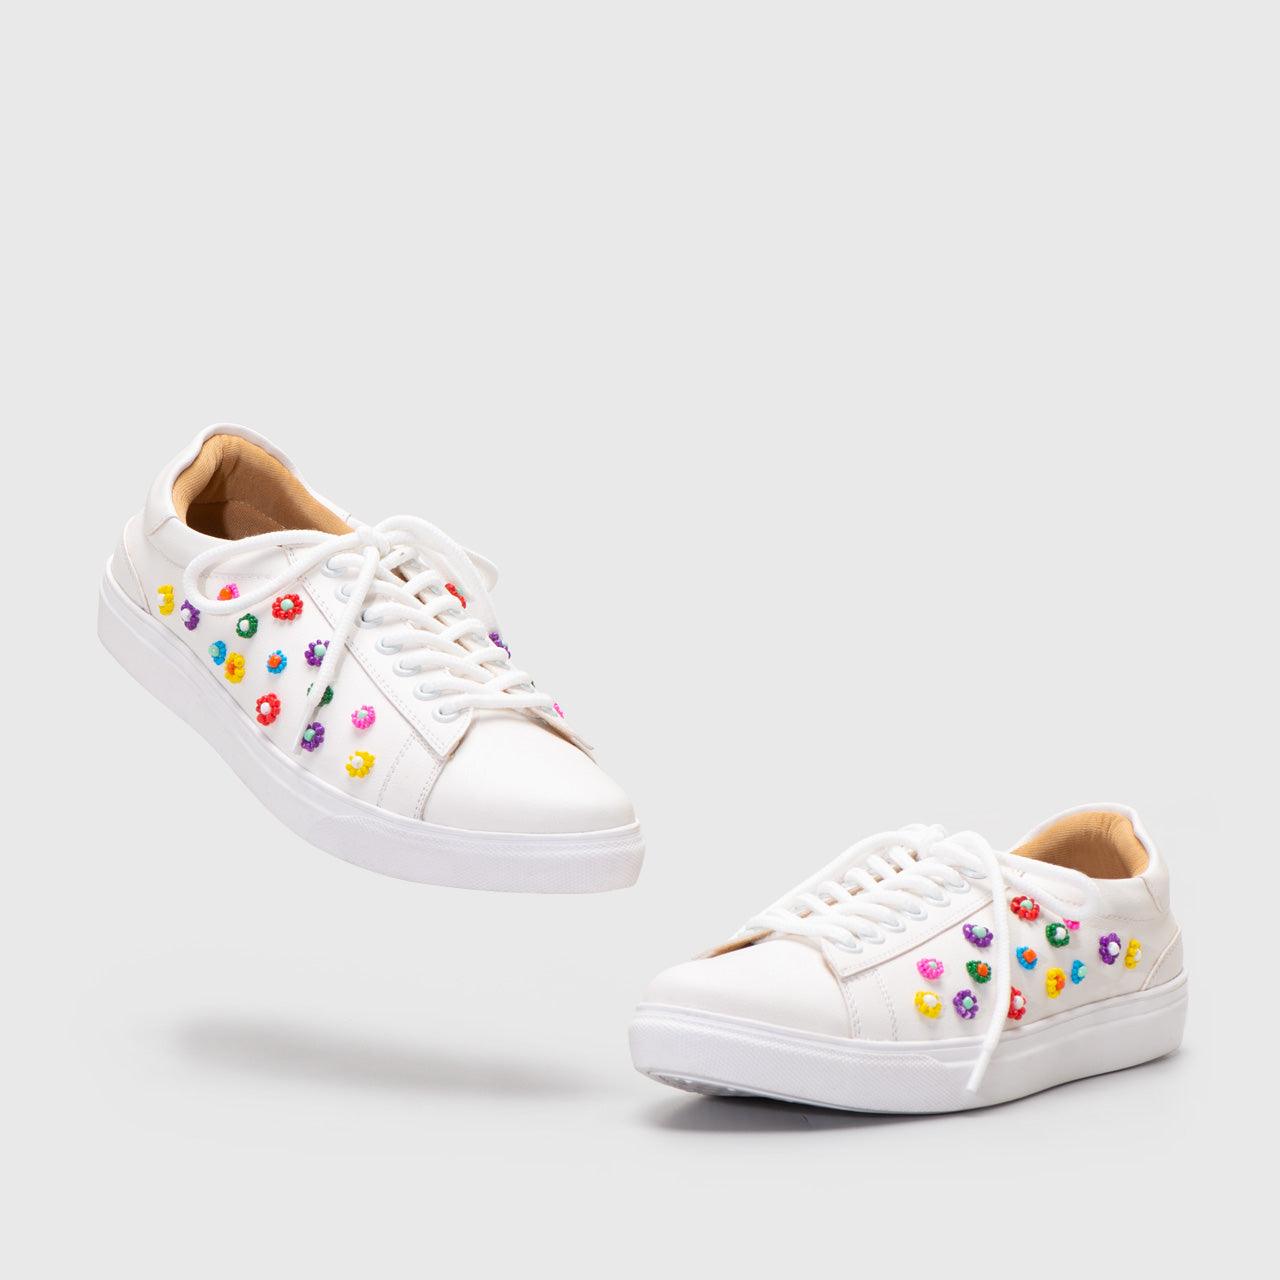 Adorable Projects-Dev Sneakers 35 / White Milcah Sneakers Embellishment White